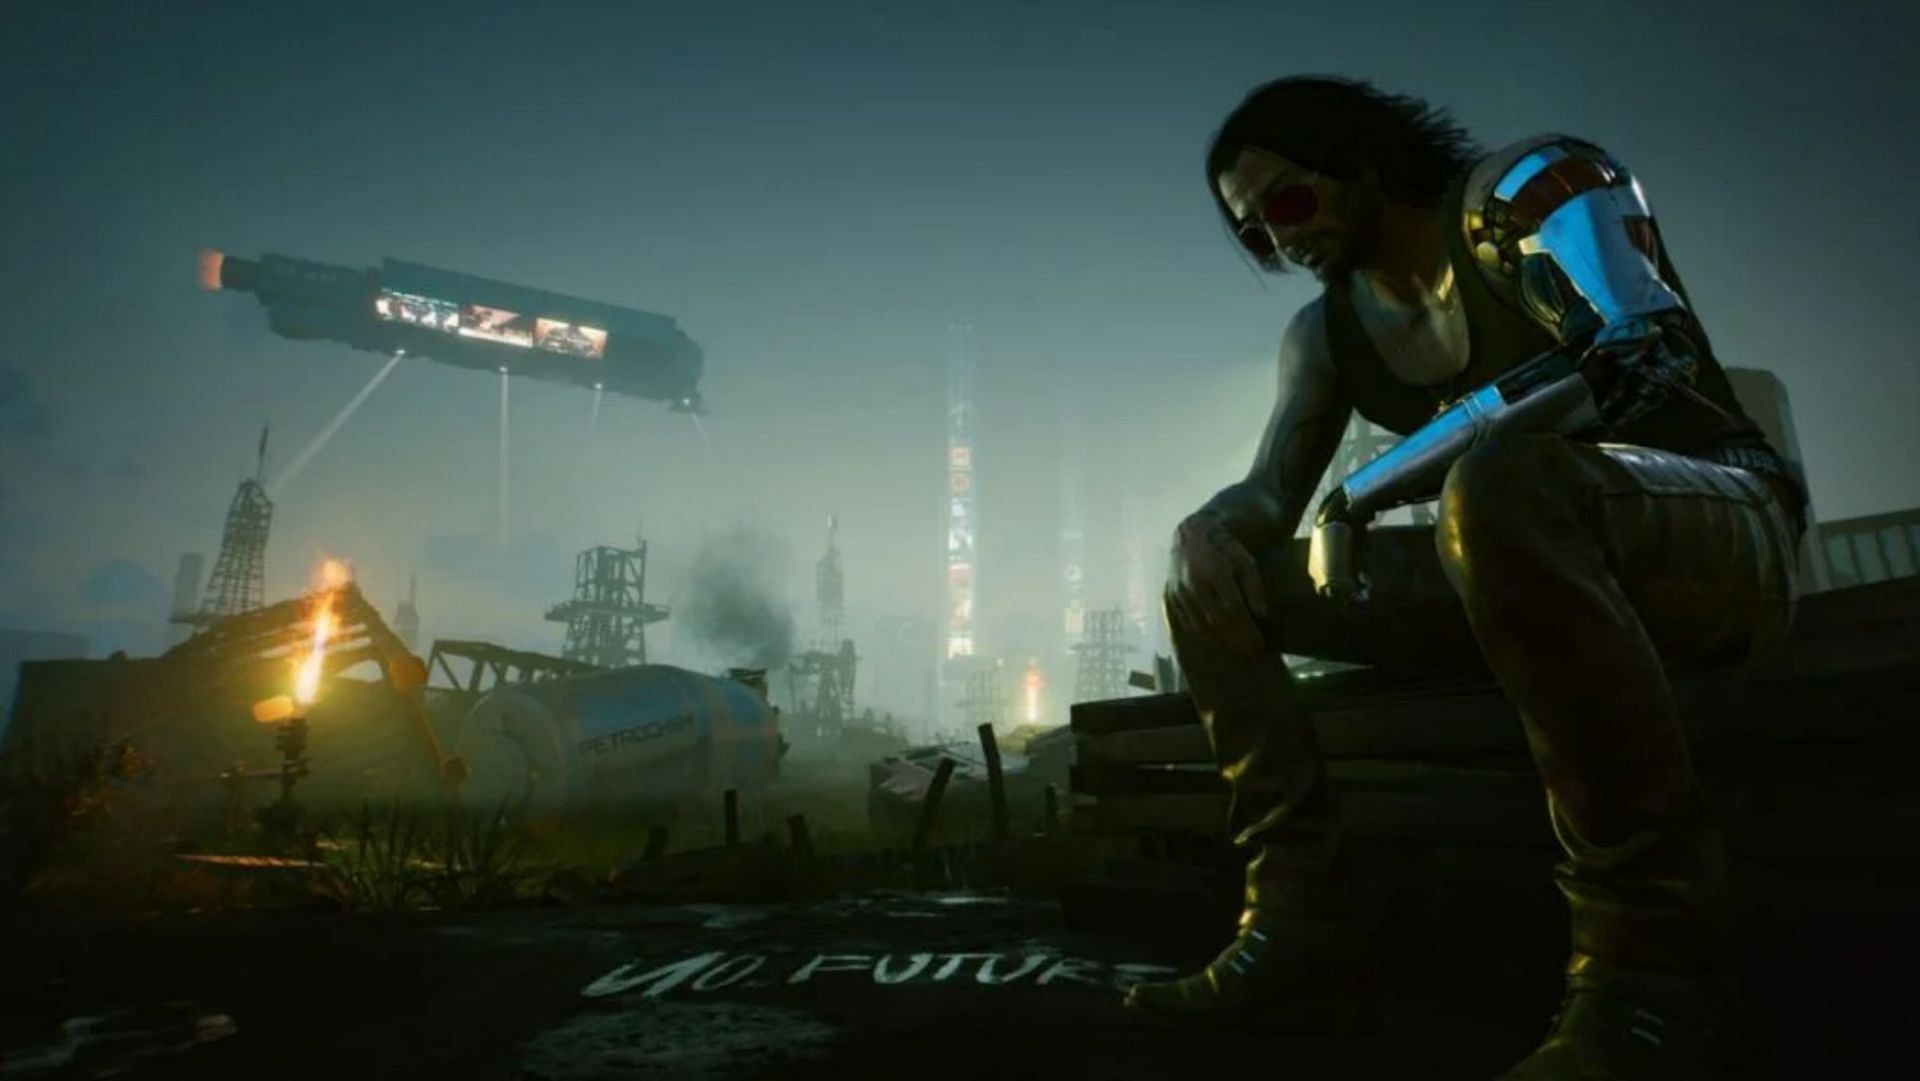 What can players expect in Cyberpunk 2077